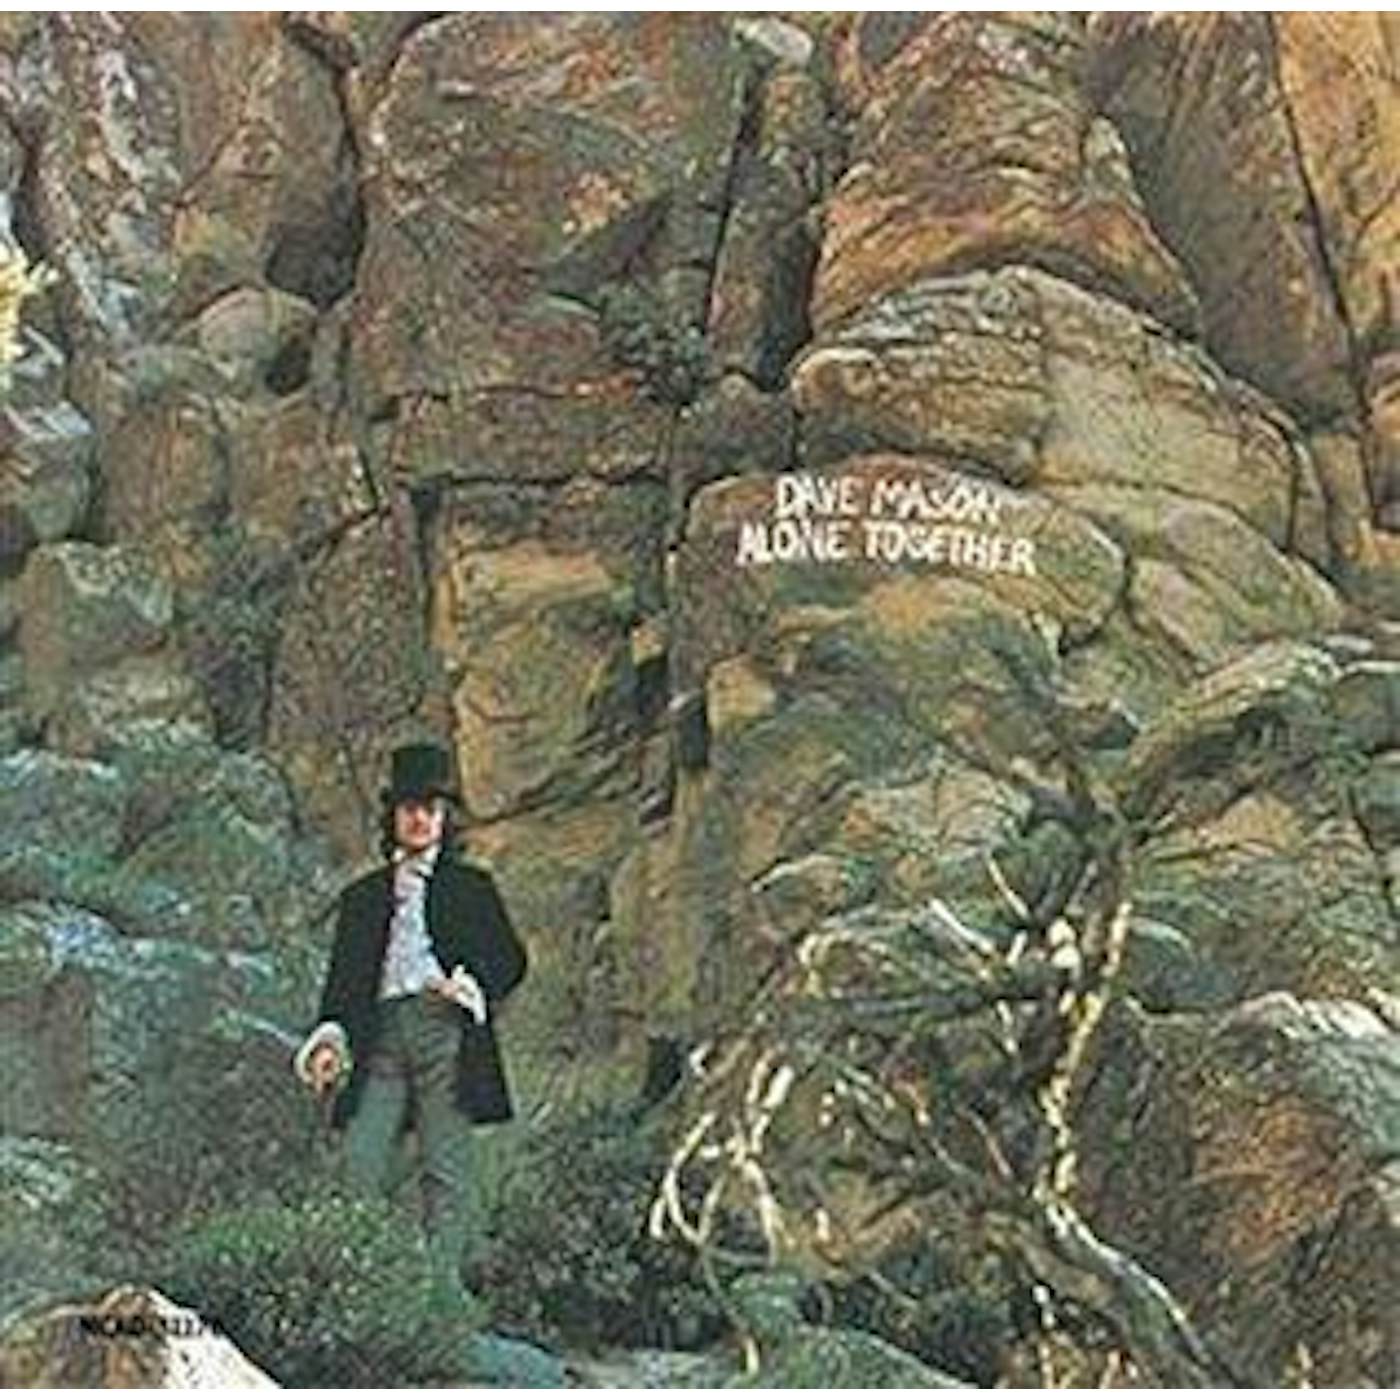 Dave Mason ALONE TOGETHER (180G/MARBLE VINYL/LIMITED ANNIVERSARY EDITION) Vinyl Record